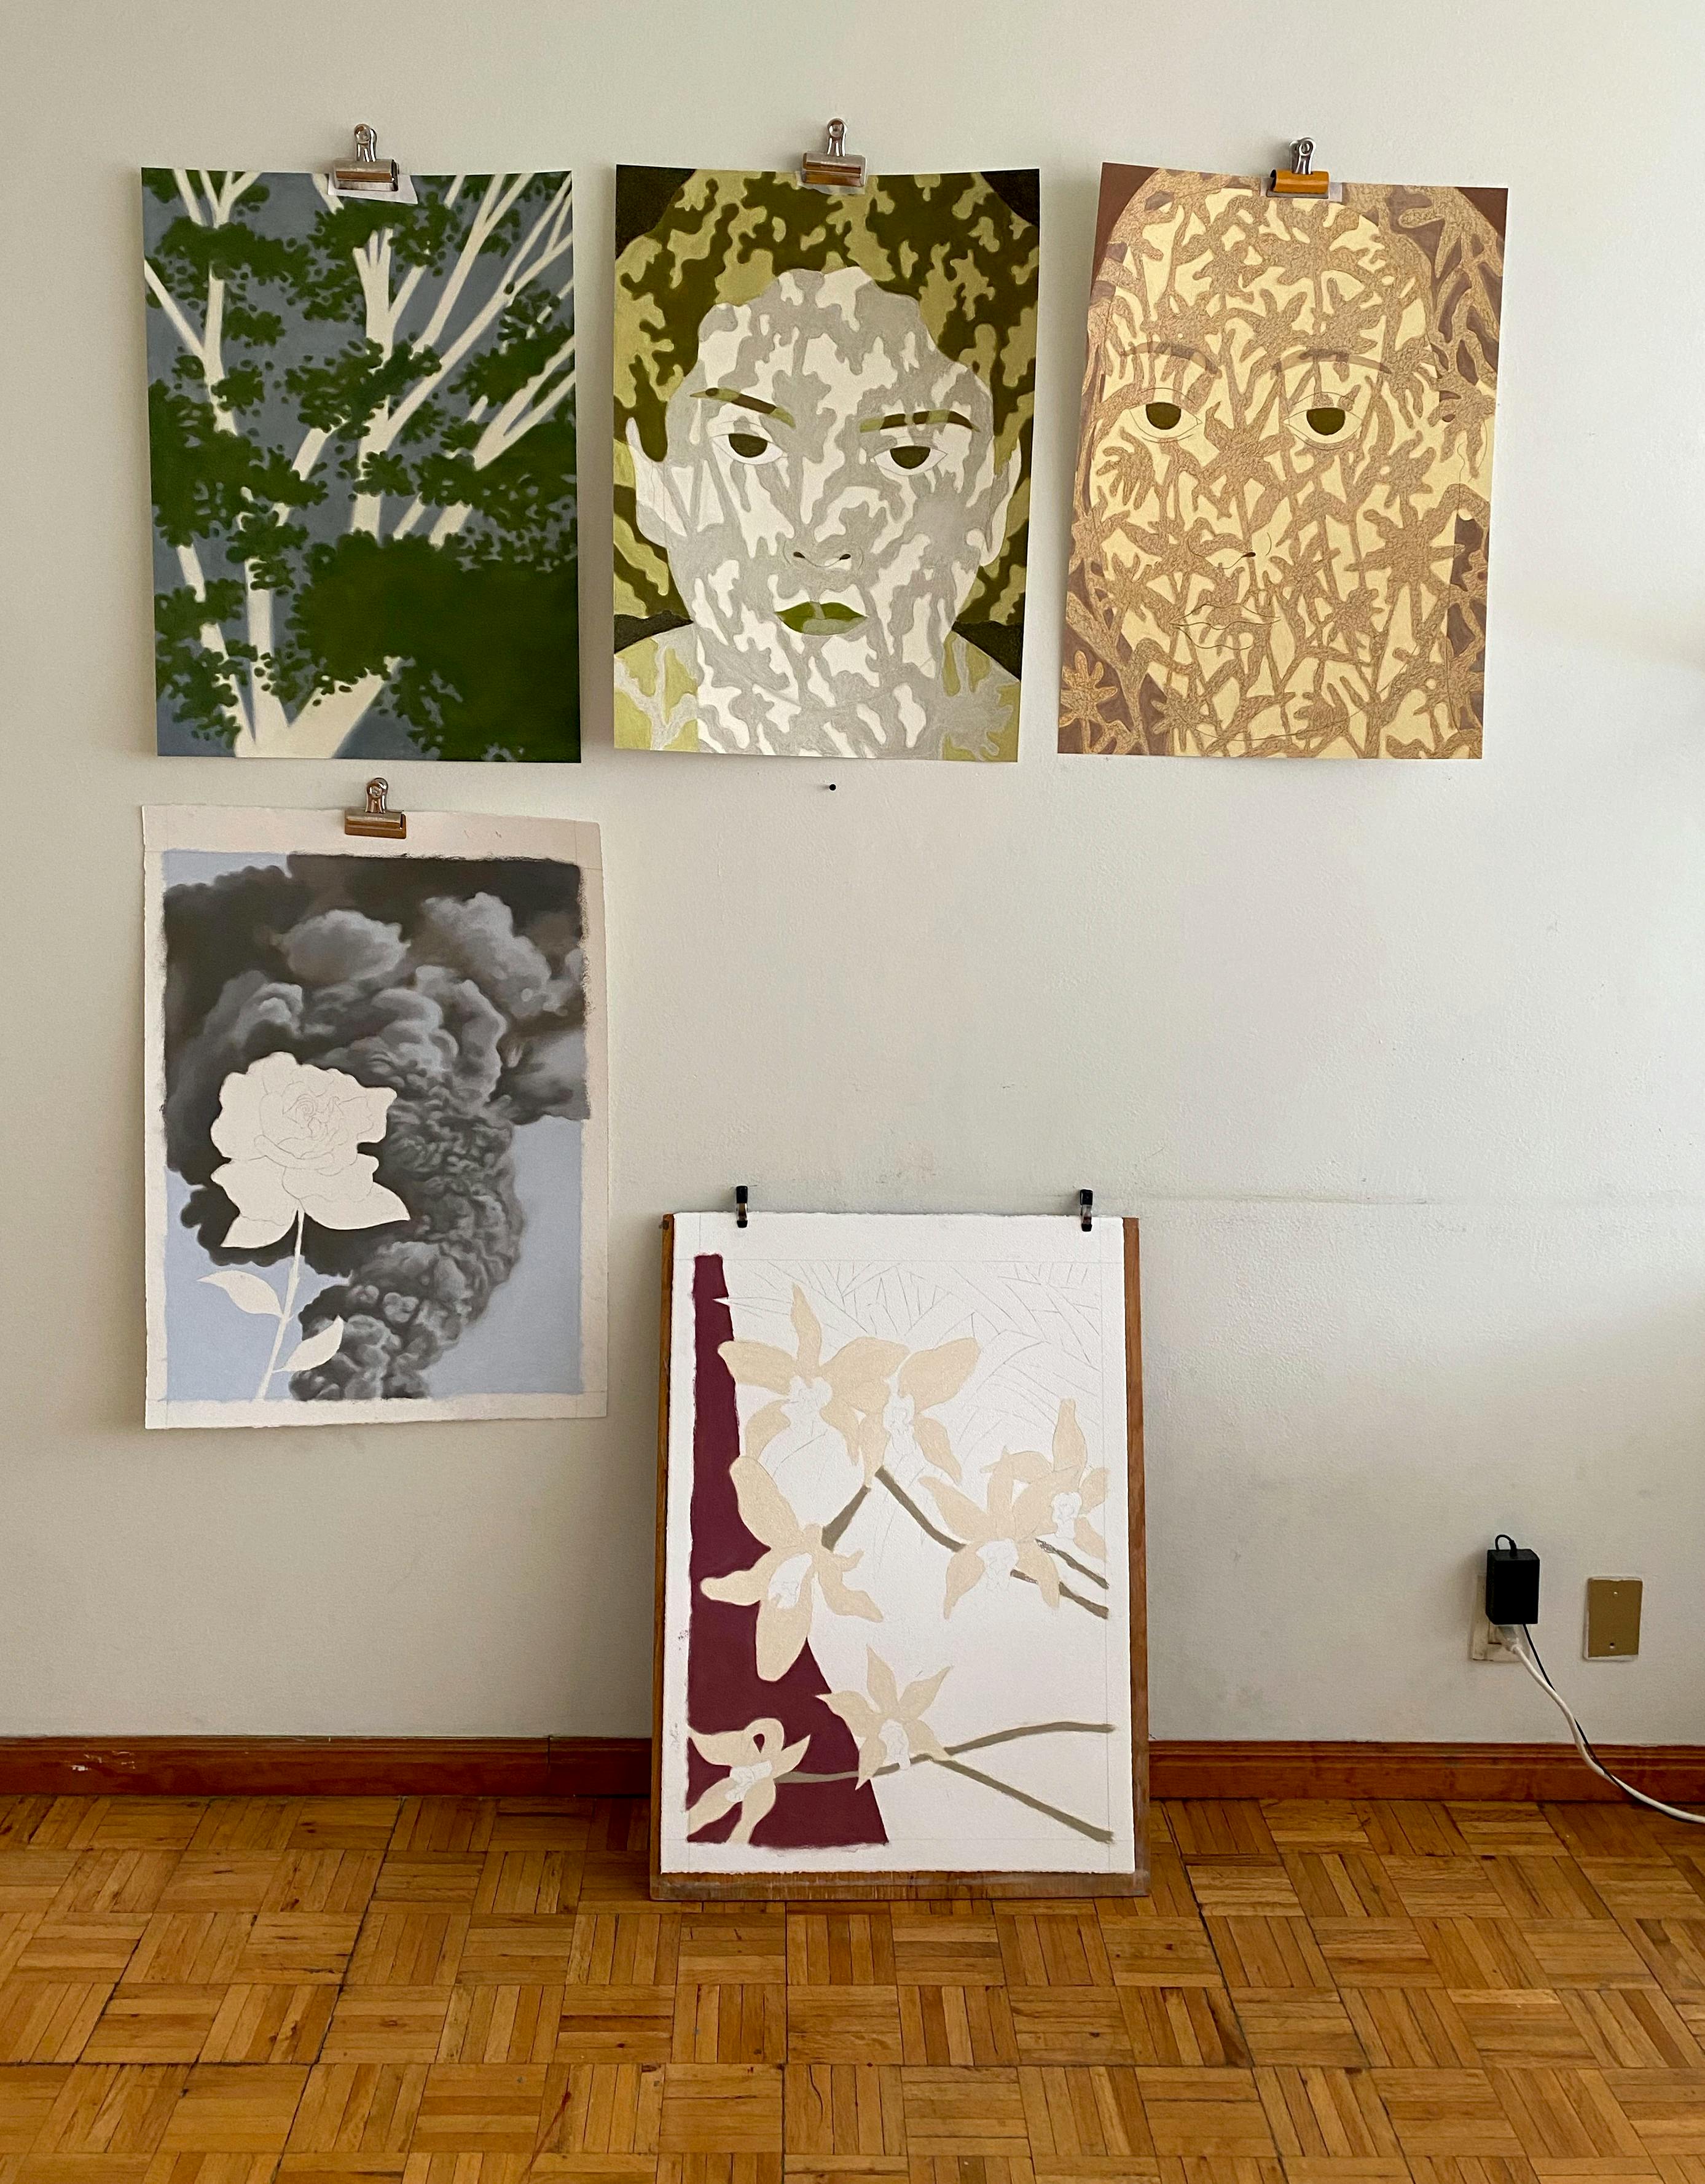 Five pastel drawings, two figurative and three of nature, by artist Rachel Levit Ruiz installed on a white wall in her studio.